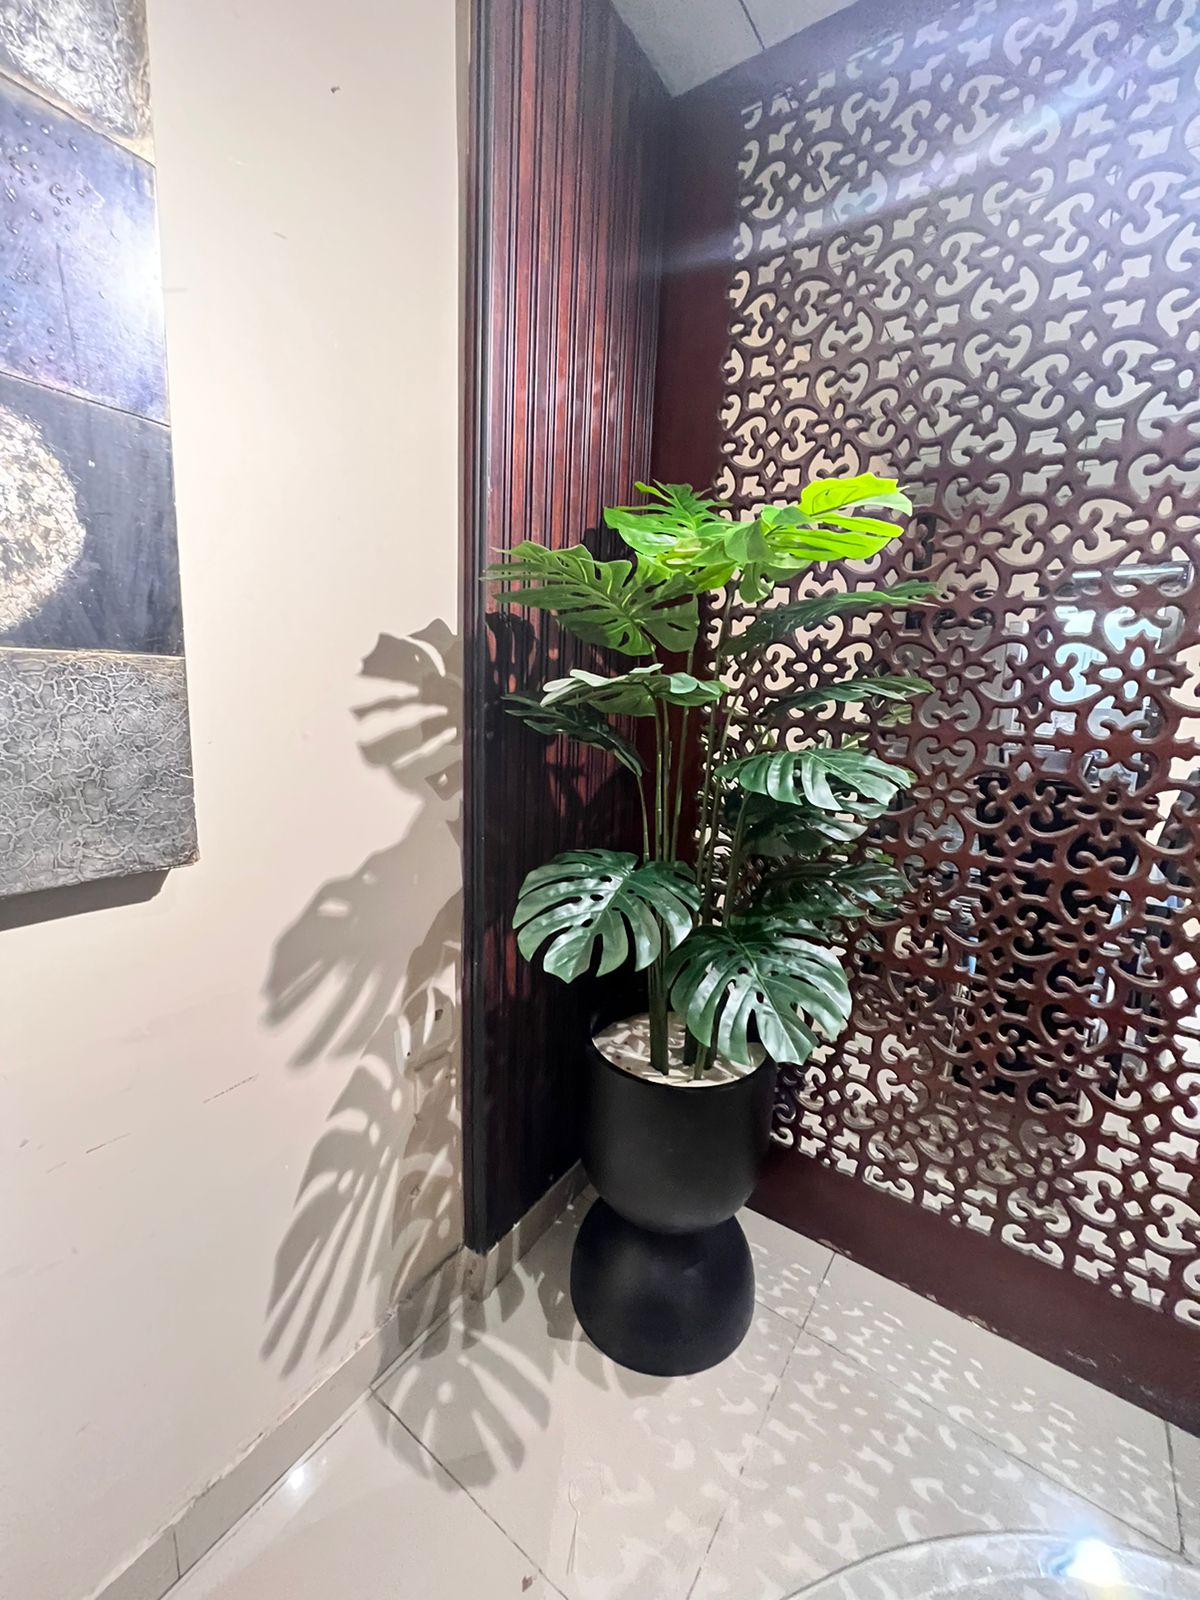 Monstera Plant with Planter